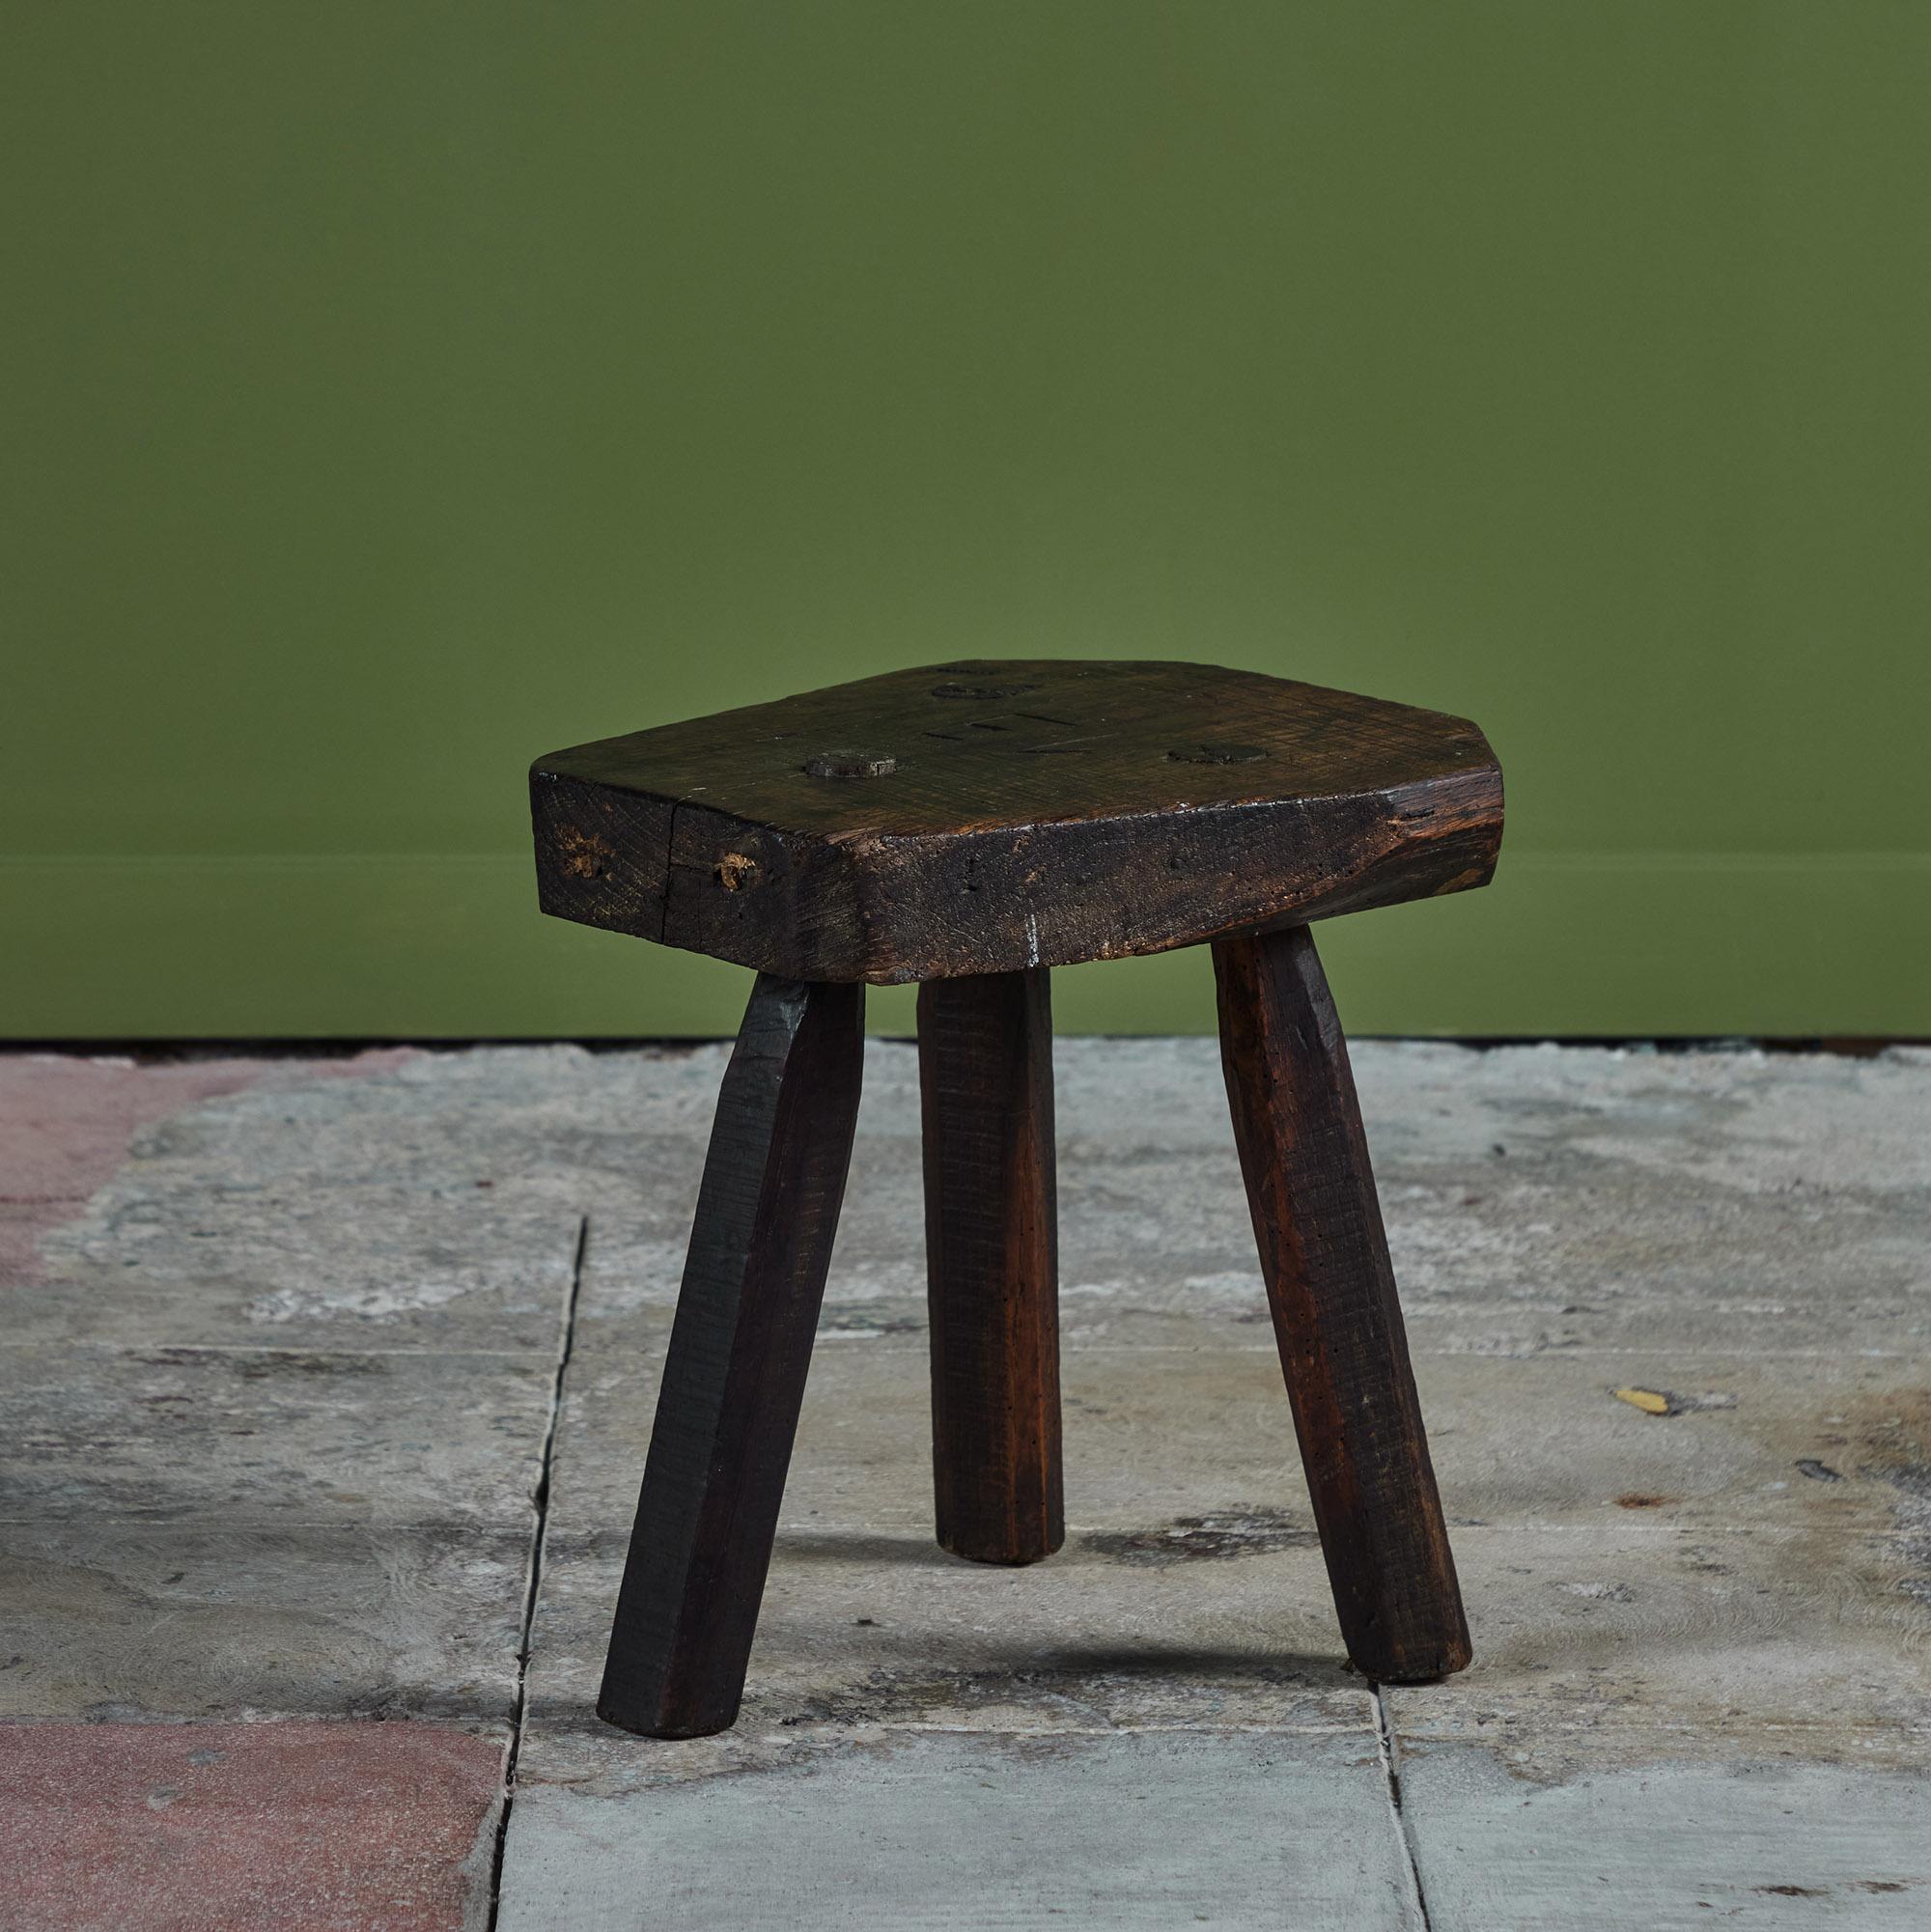 Wood tripod milking stool from the late 18th Century. The stool features a thick seat that sits atop three spayed legs. A beautiful stool or side table.
Signed on seat top.

Dimensions
13